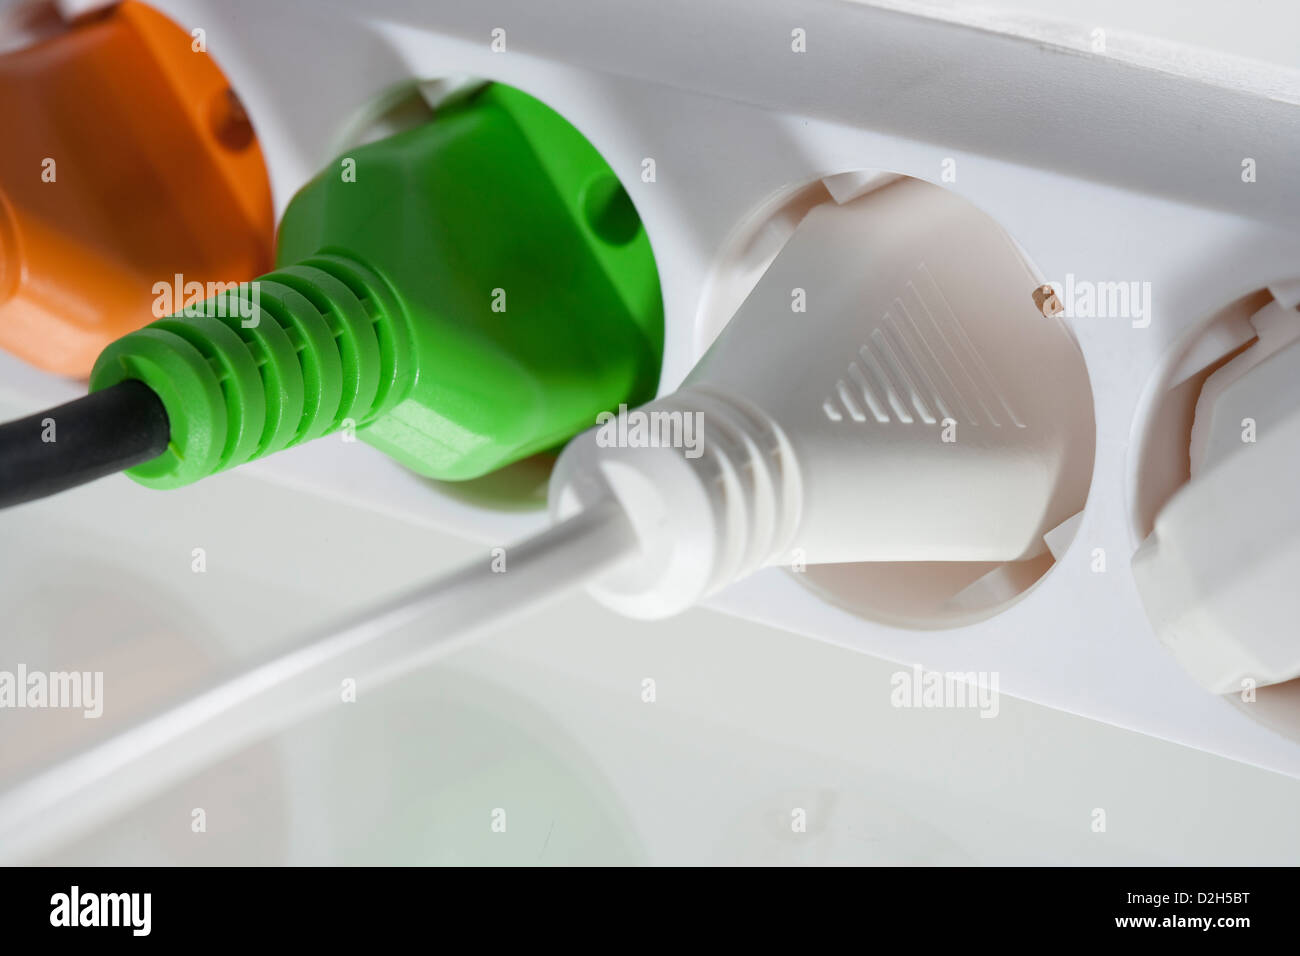 Berlin, Germany, power strip with different colored plugs Stock Photo